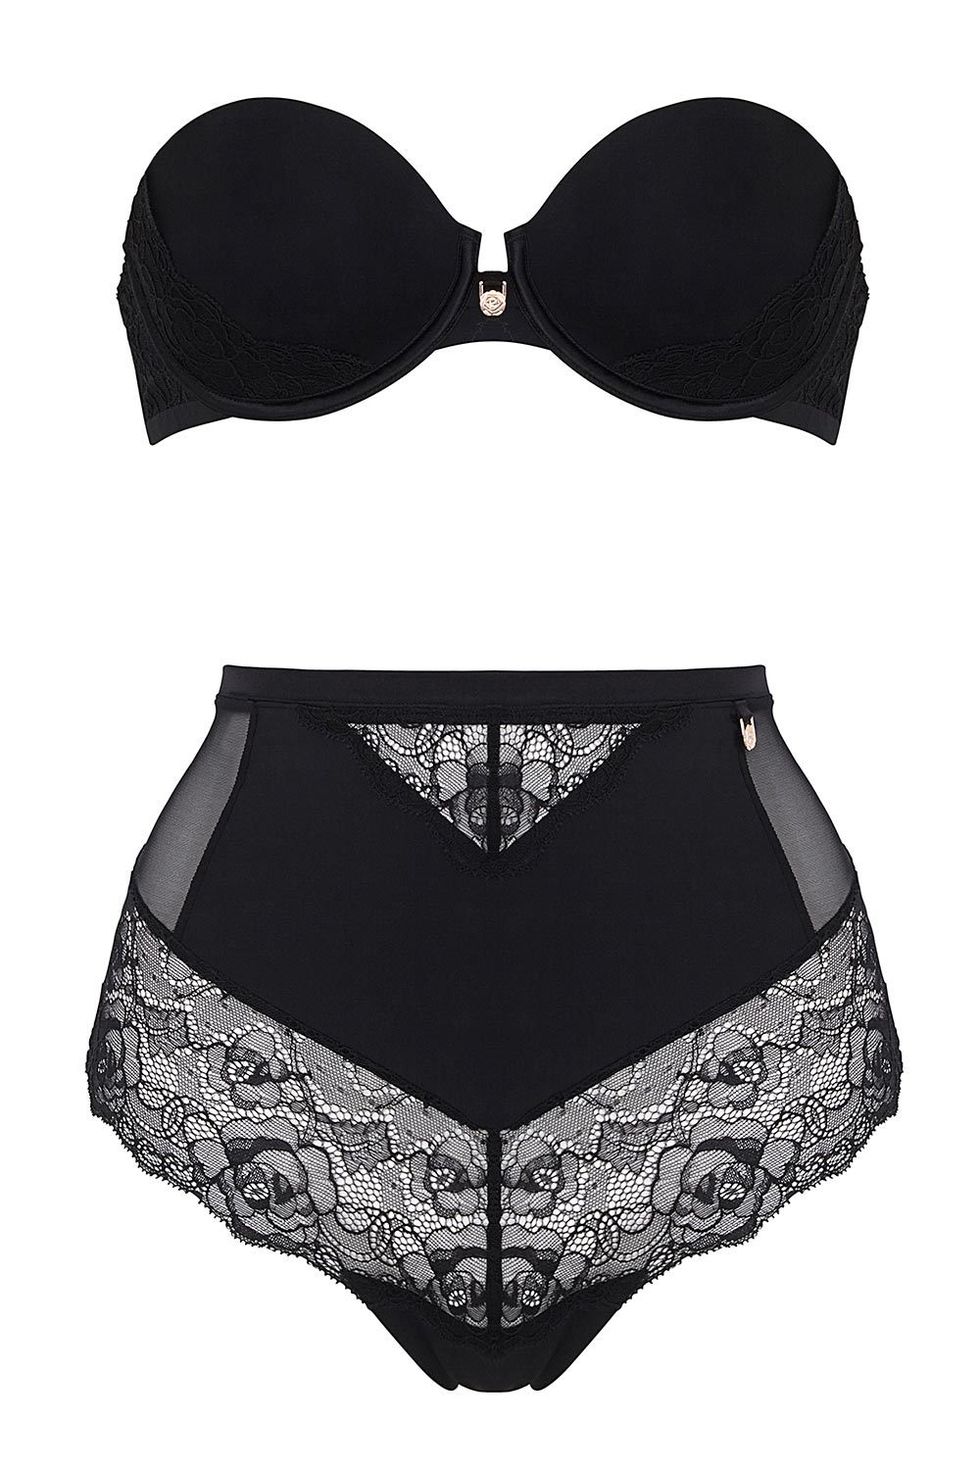 MARKS AND SPENCER Lingerie set from the Boutique Range. Black with